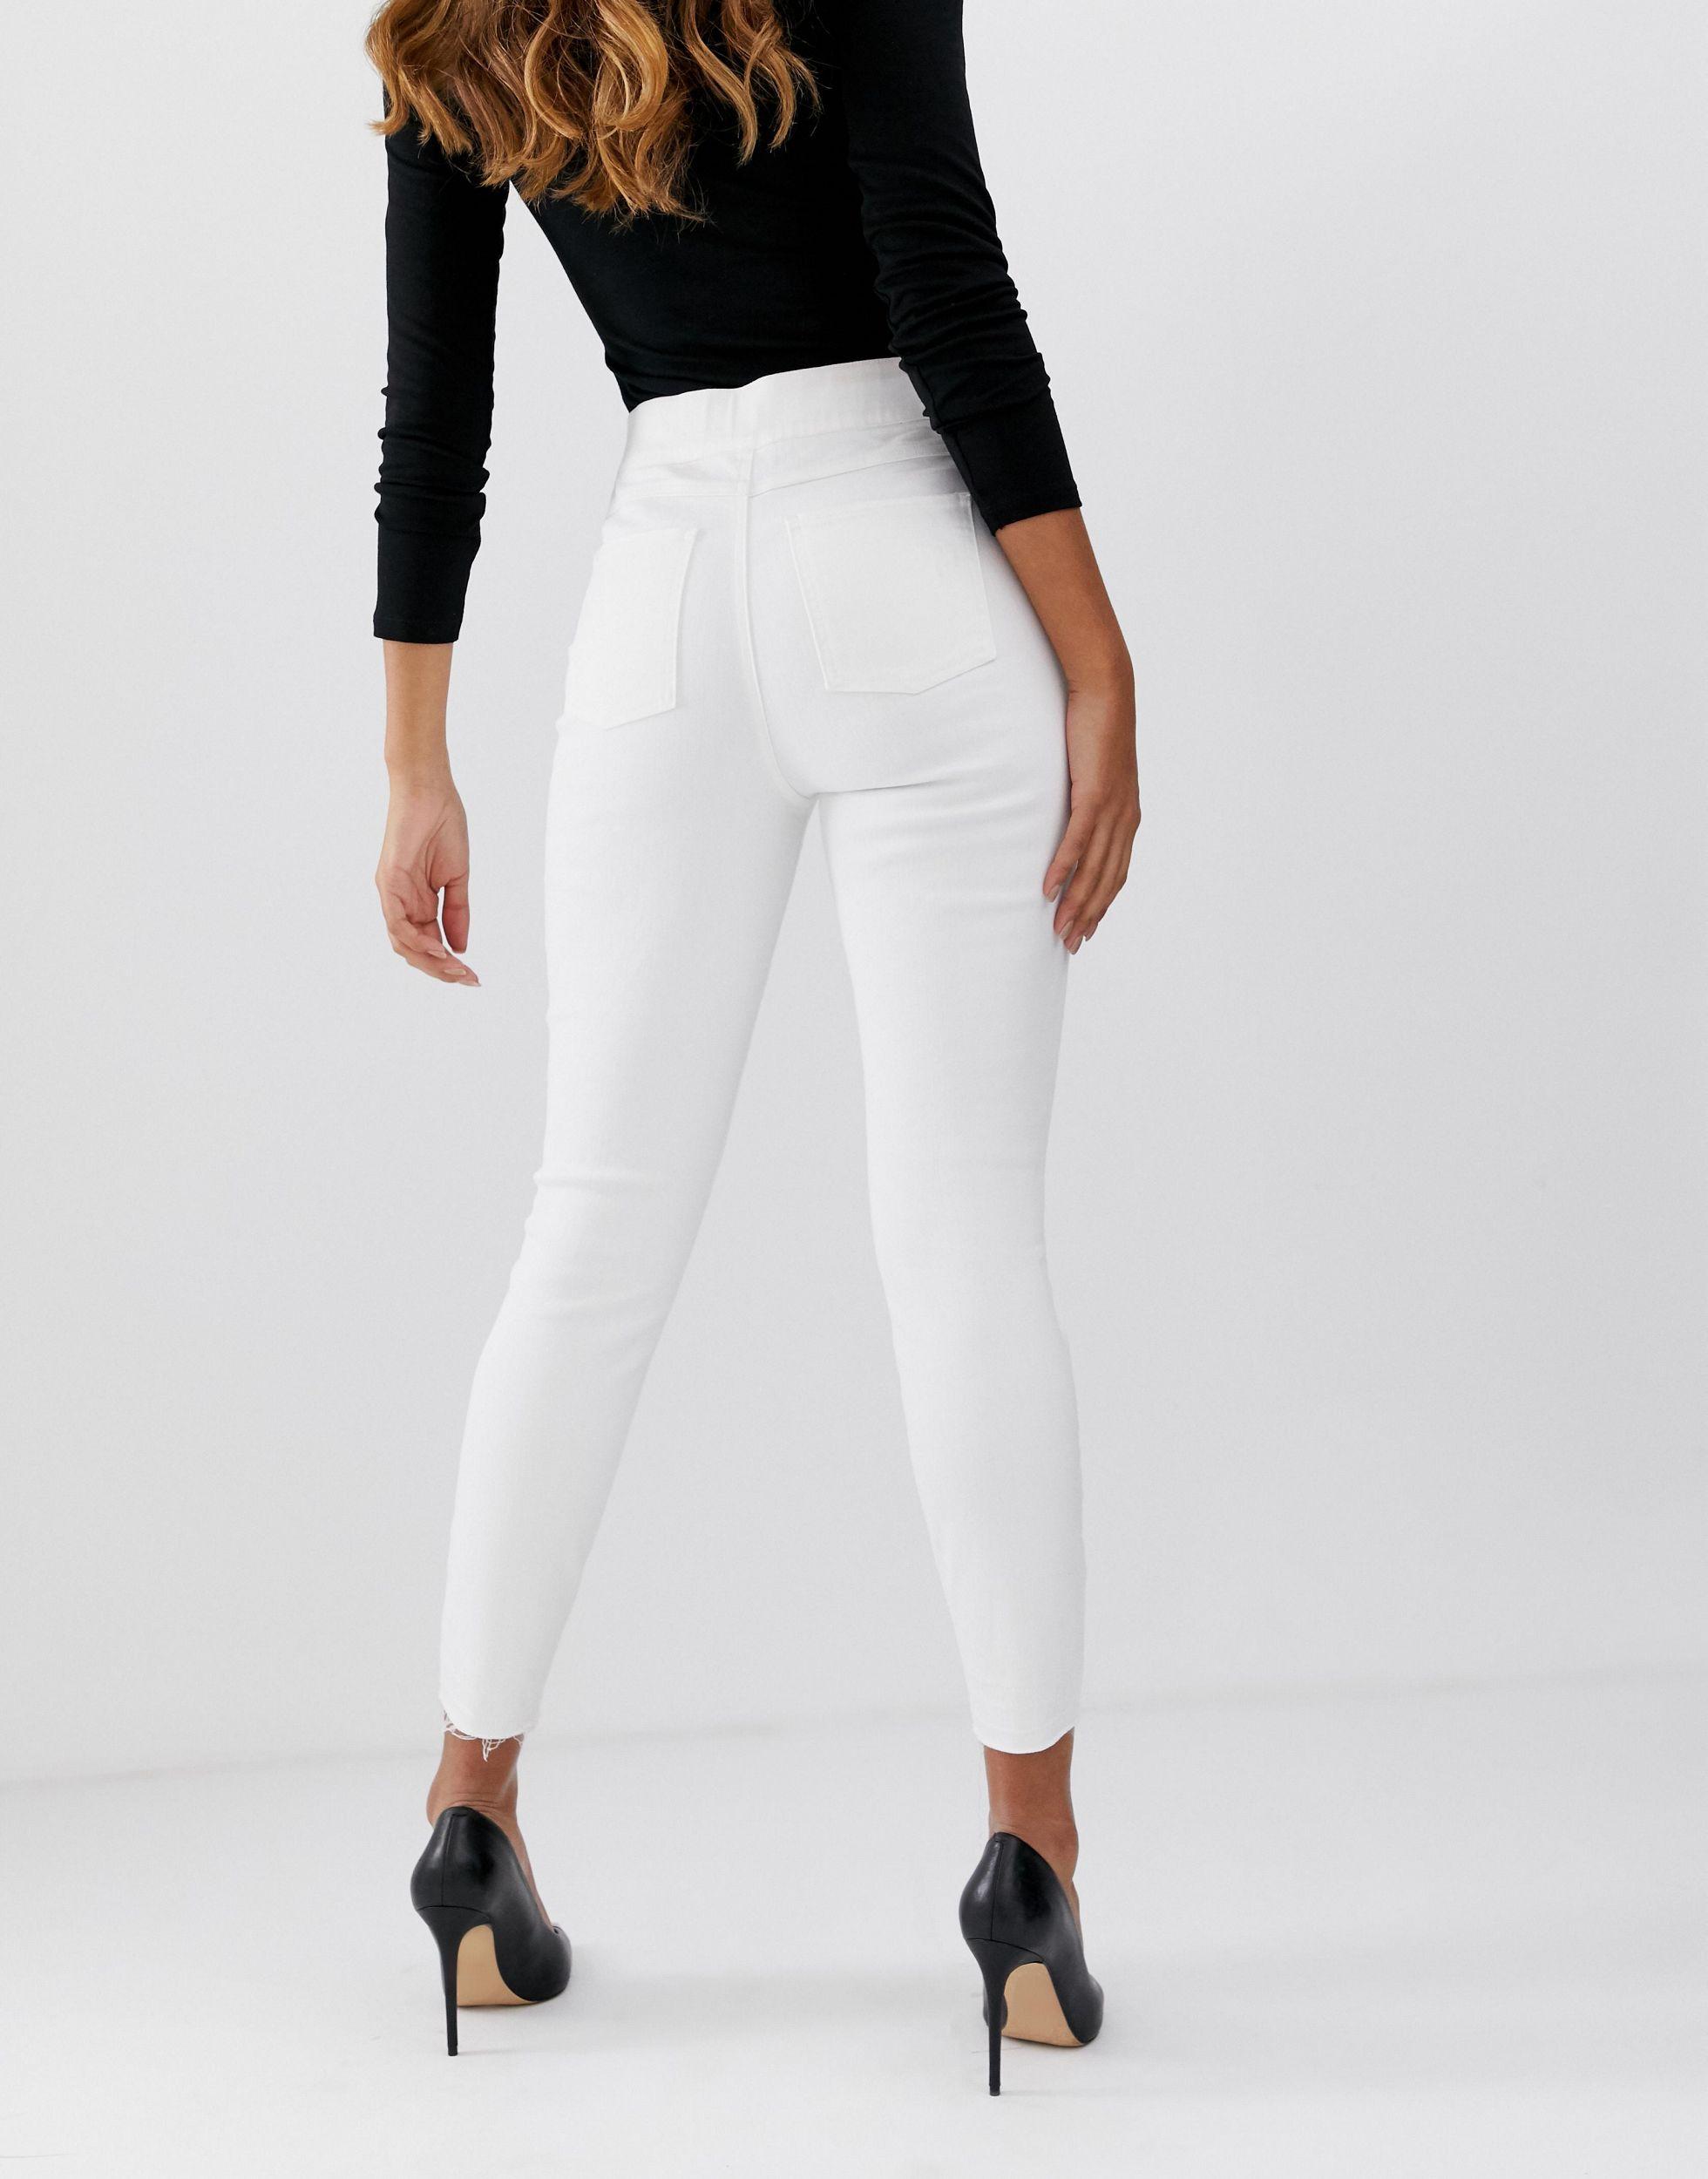 Spanx Denim Shape And Lift Distressed Skinny Jeans in White - Lyst